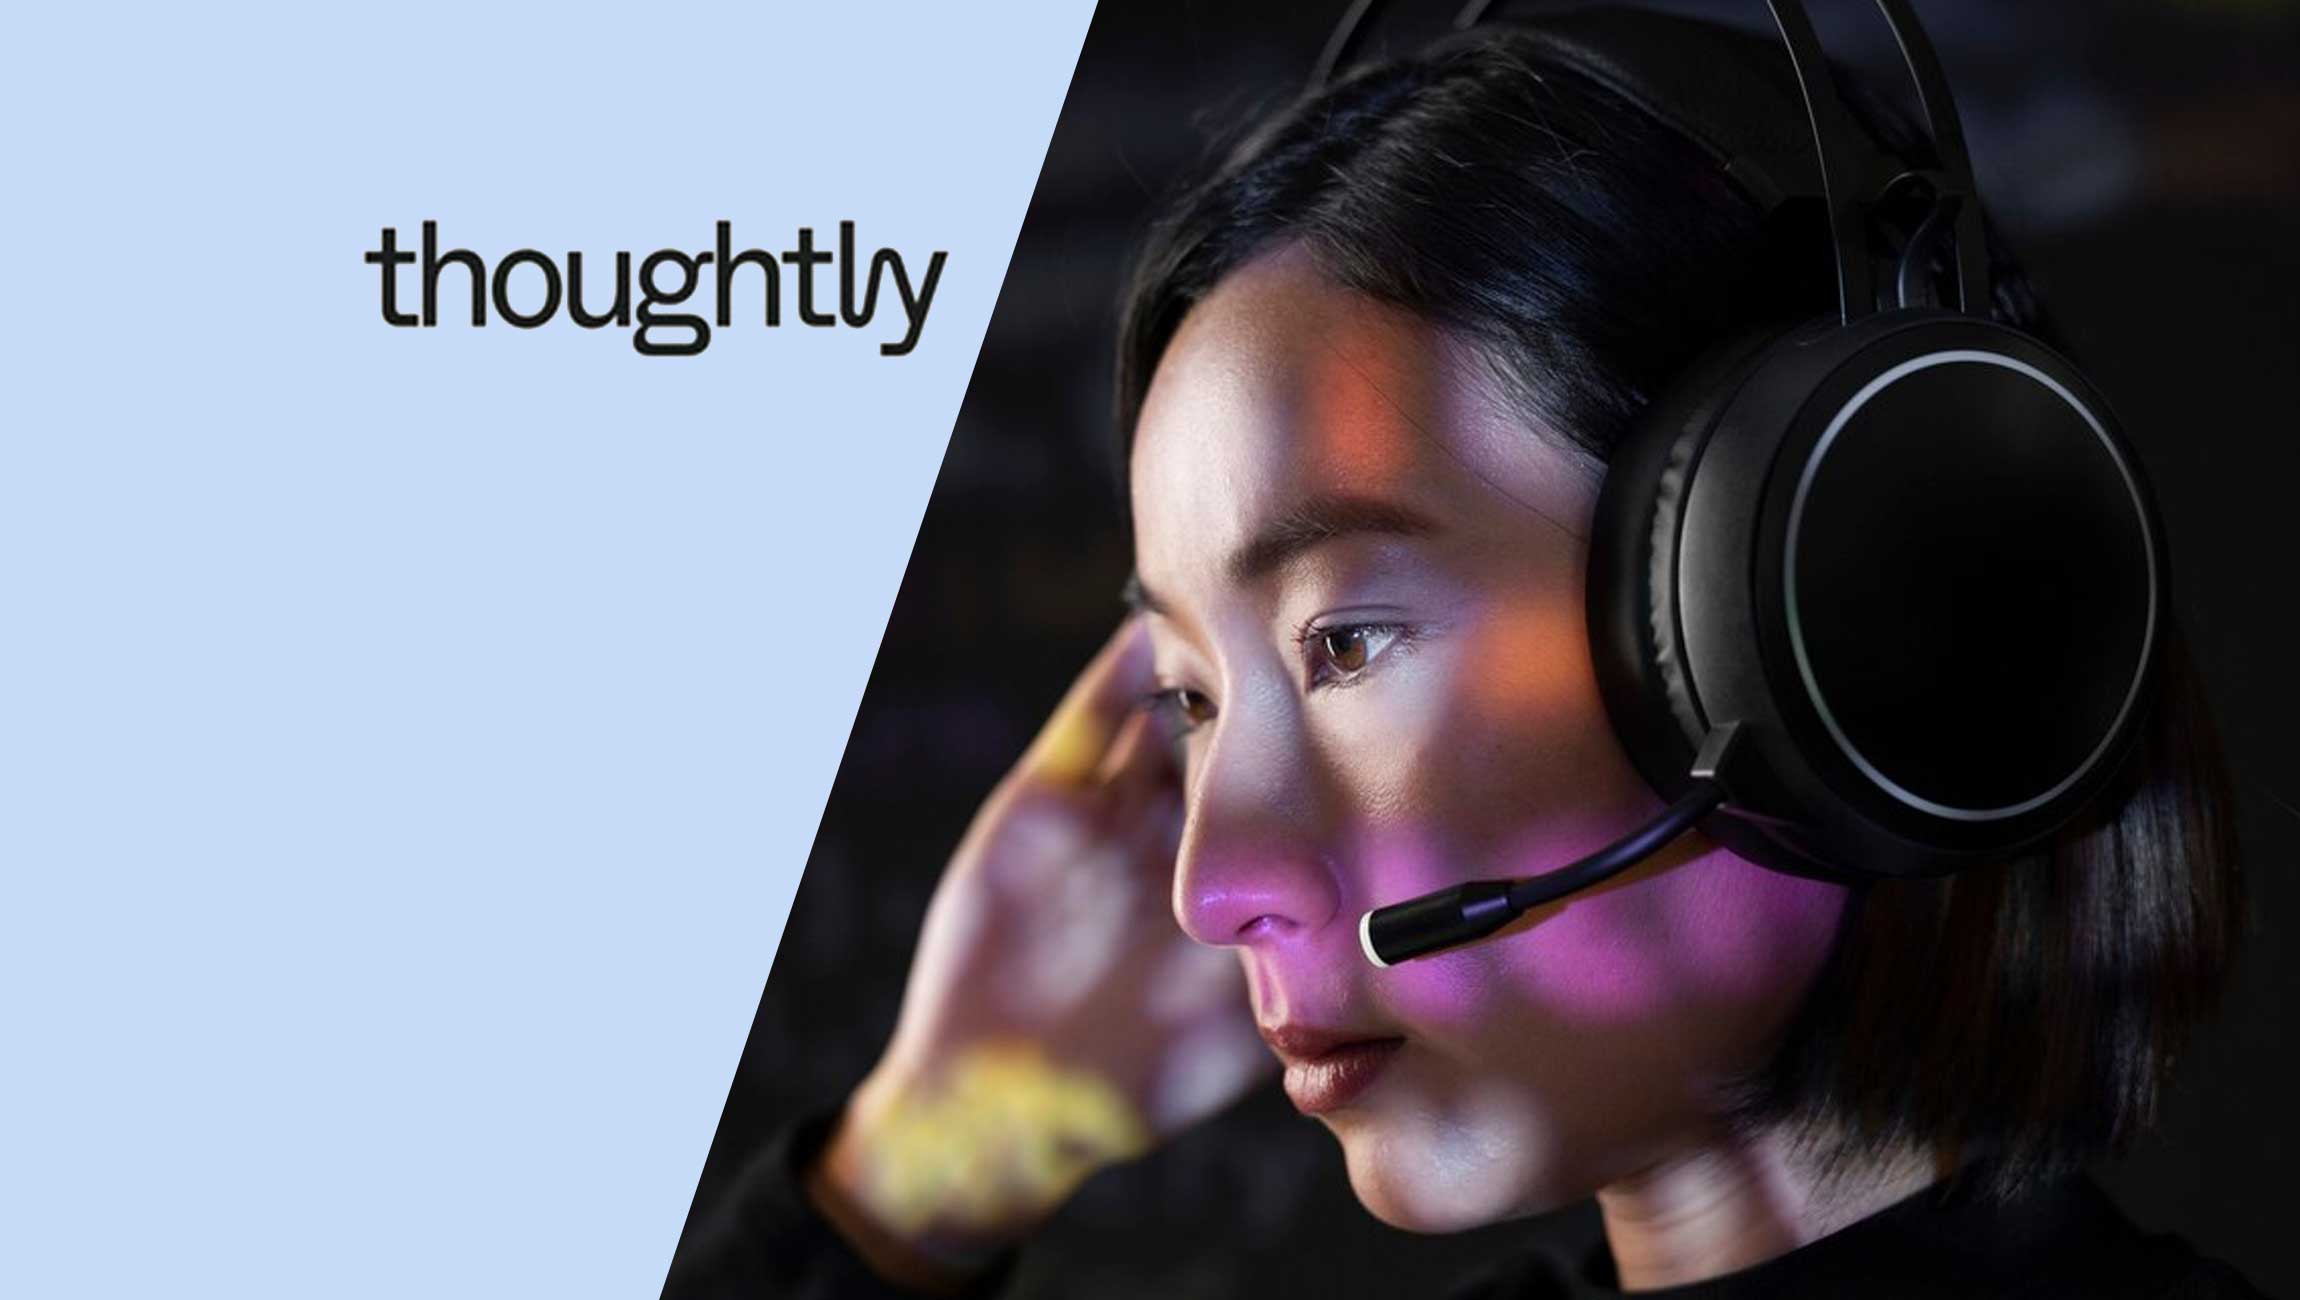 Thoughtly Announces $3M Seed Round to Revolutionize Contact Centers with Human-like AI Agents